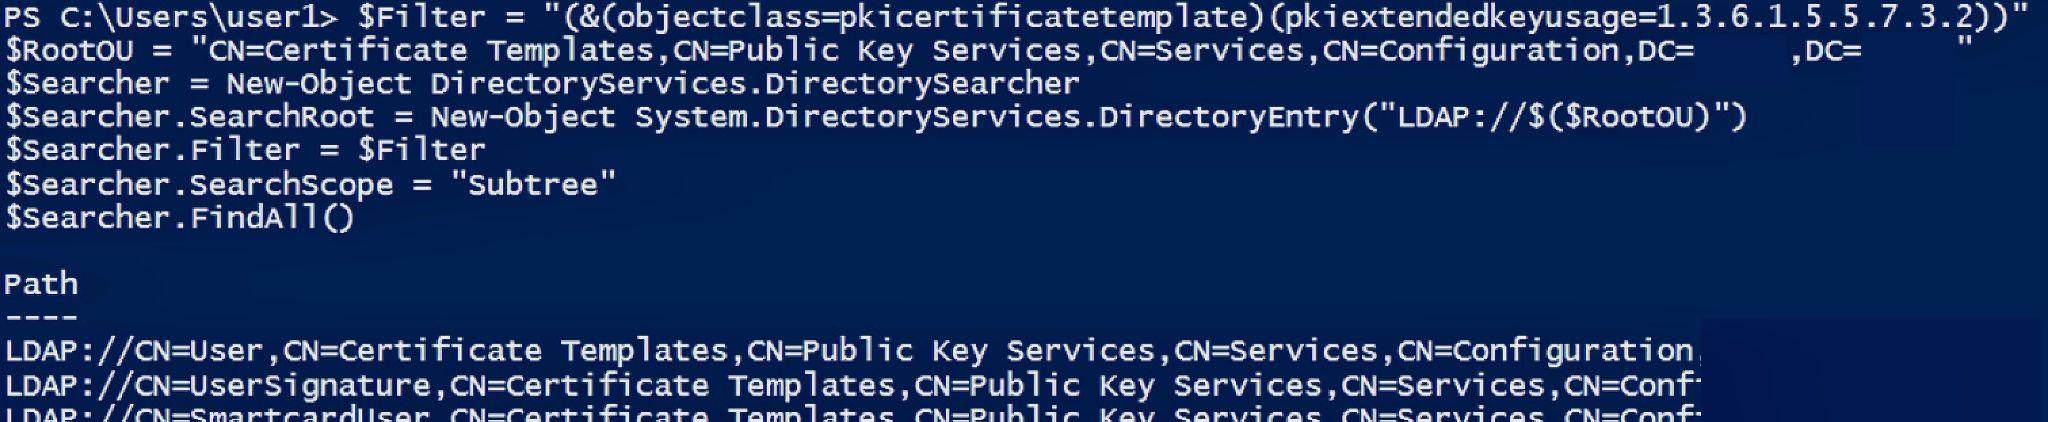 Using PowerShell to LDAP query certificate templates with Client Authentication